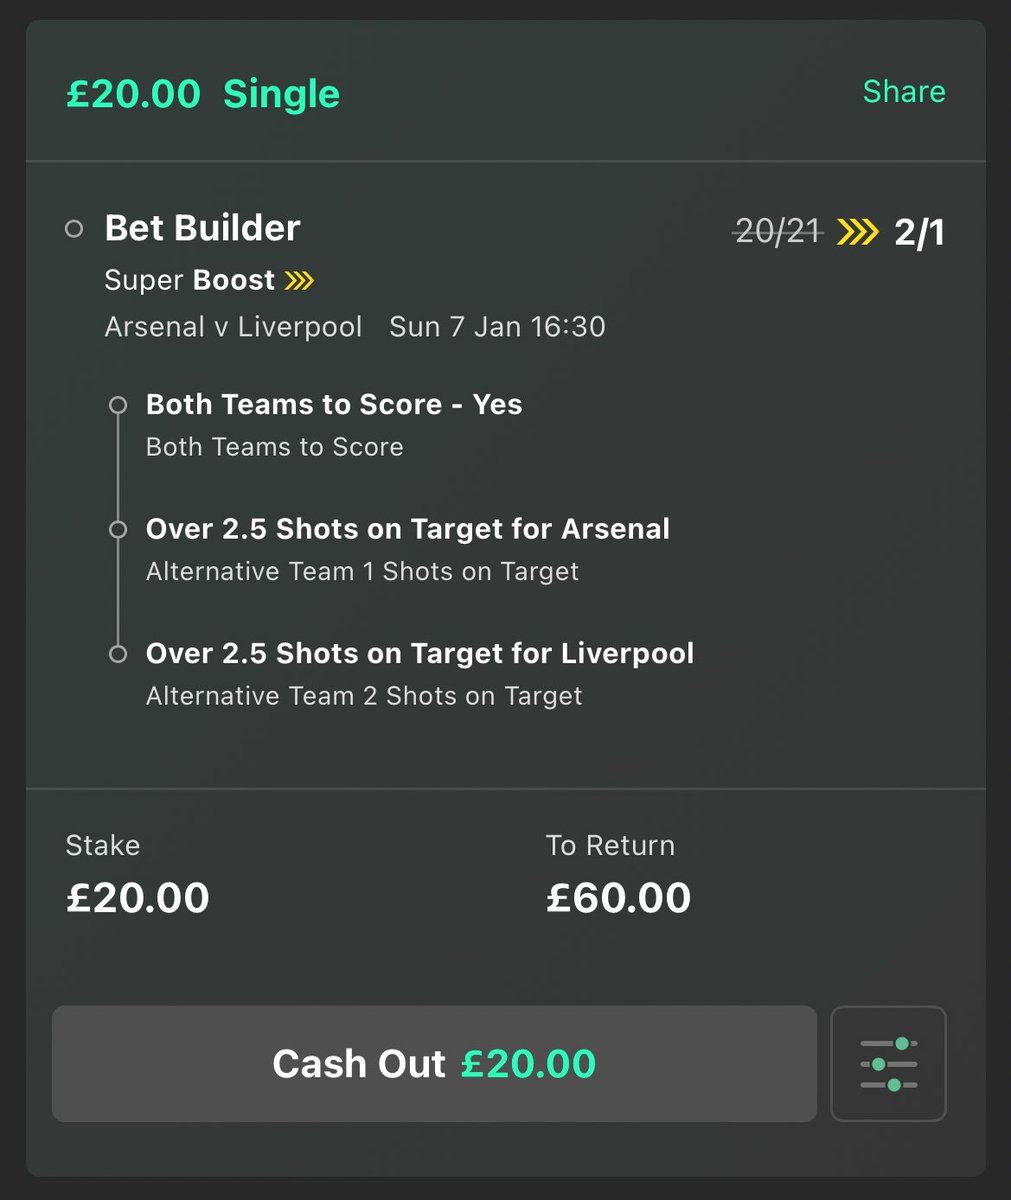 😍 £60 FREE CASH GIVEAWAY! If this Liverpool vs Arsenal Bet365 super boost wins, we’ll give away £60! 👉 One entry if you LIKE this tweet. 👉 One entry if you RETWEET this tweet. Must be following us, good luck!